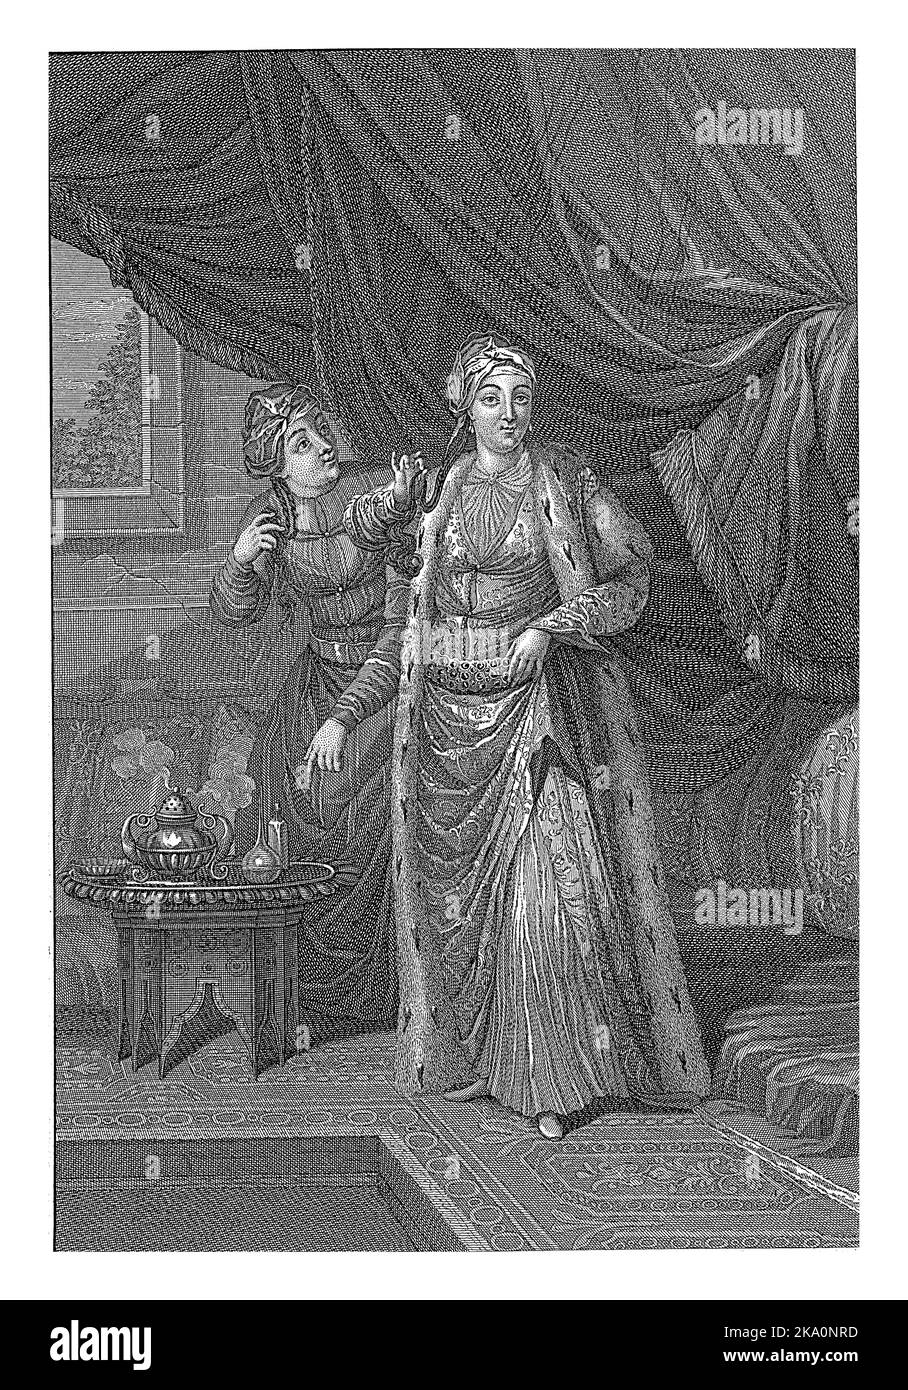 A Turkish woman and her maidservant, in traditional clothes. The room they are in is covered with carpets. The maid points the woman to a table on whi Stock Photo